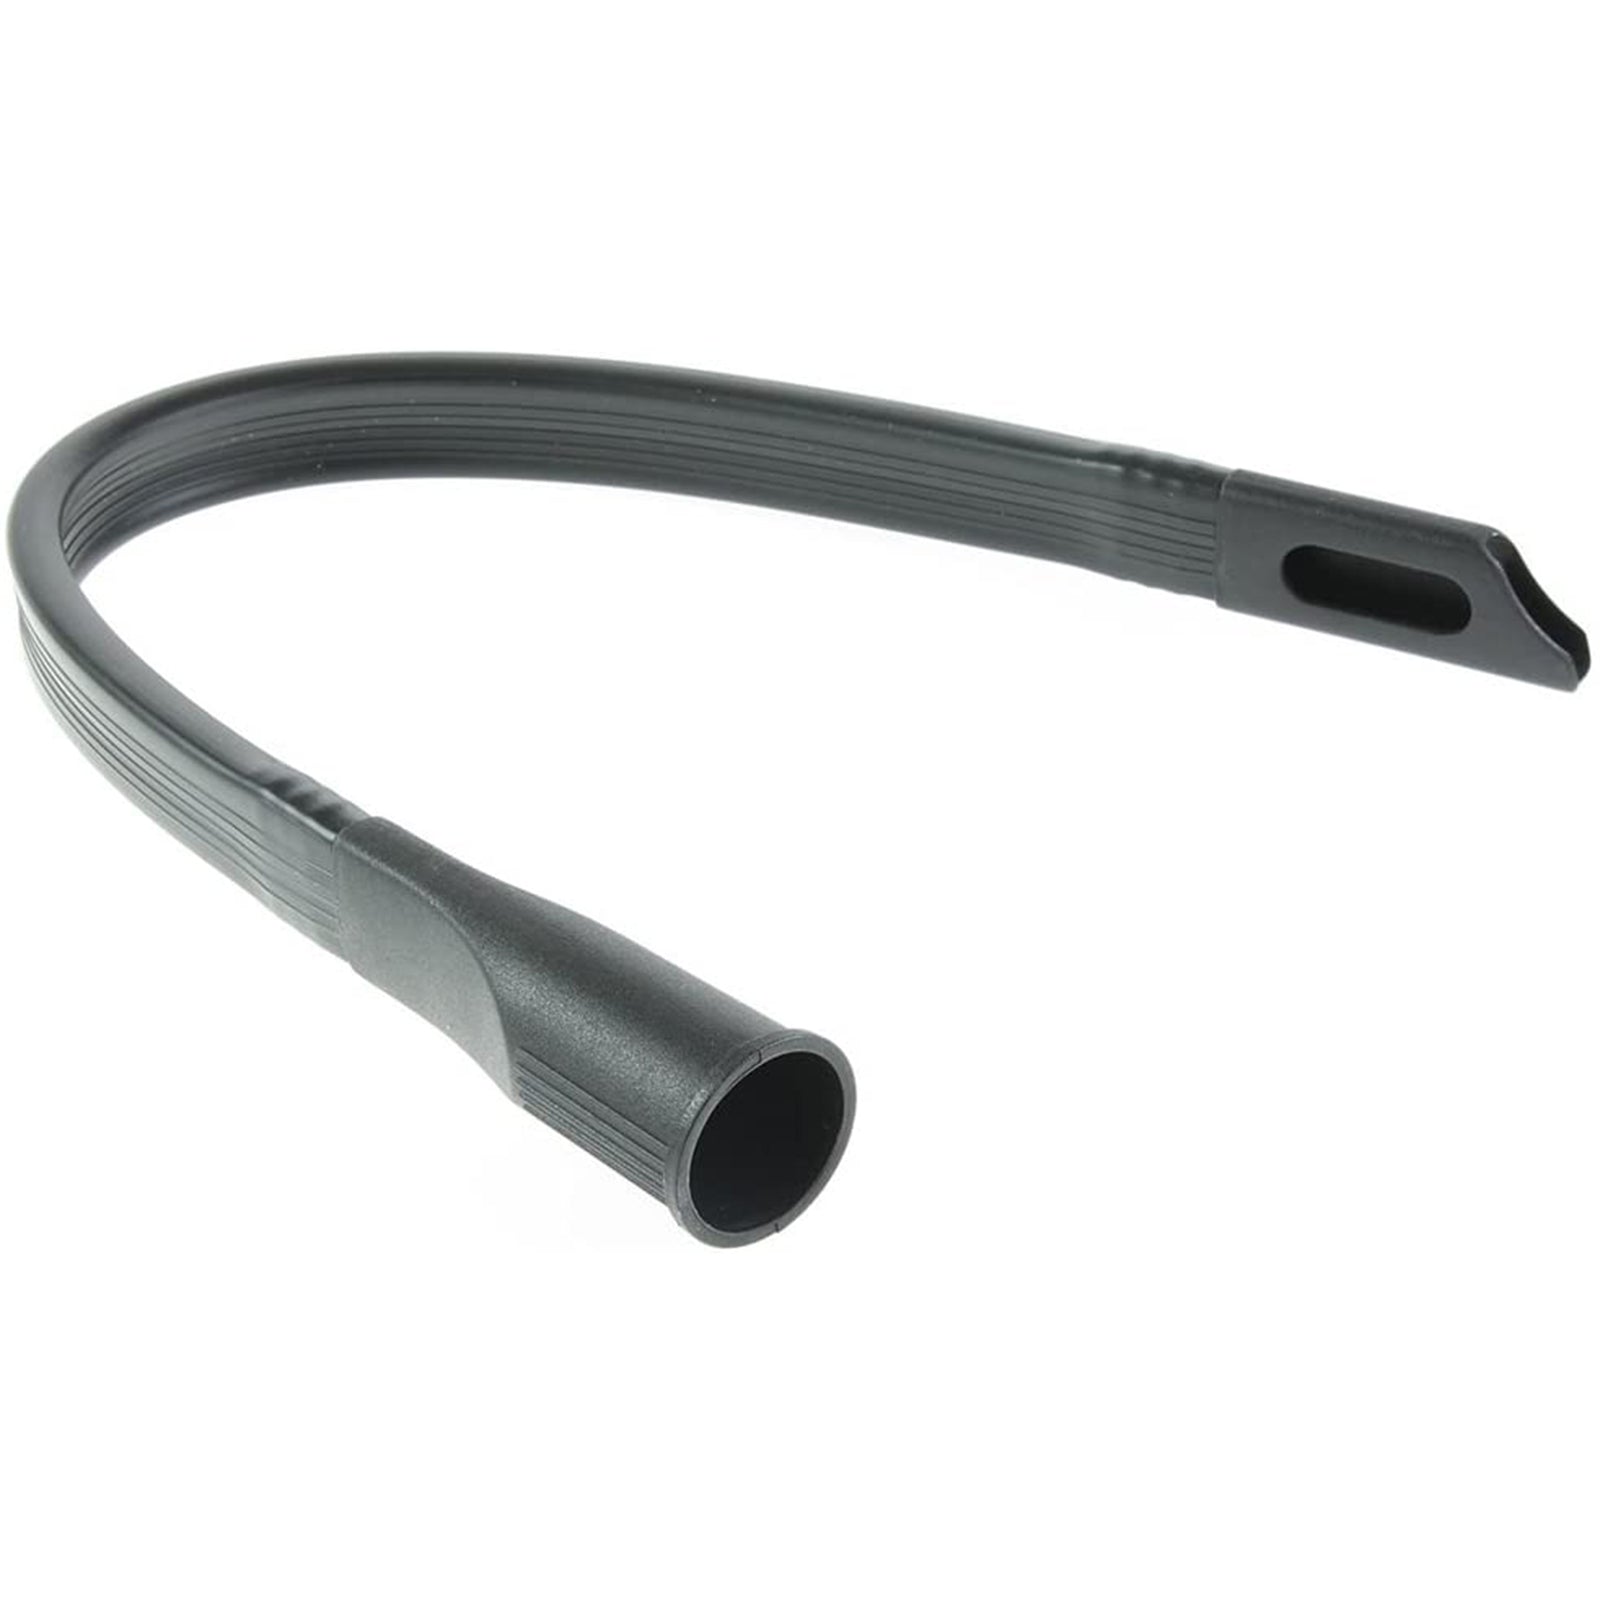 Flexible Crevice Tool Extra Long compatible with DAEWOO Vacuum Cleaner (32mm)